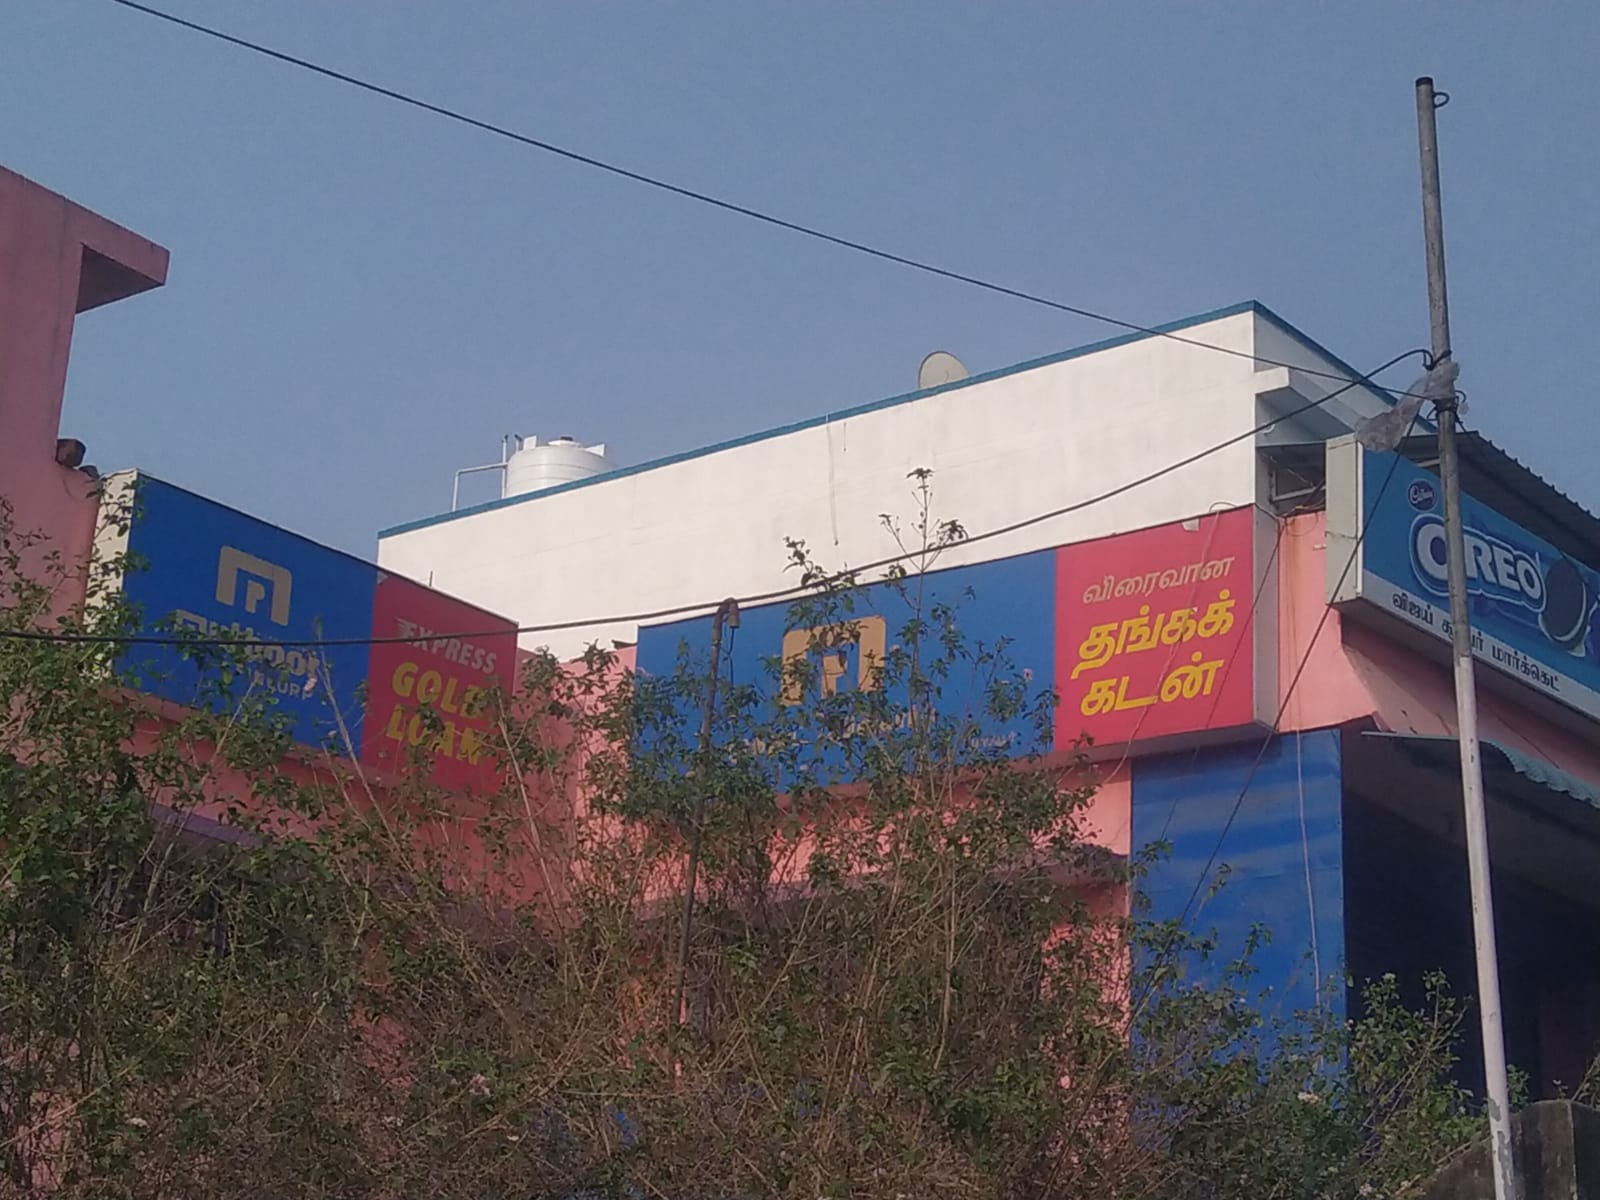 Photos and Videos of Muthoot Fincorp Gold Loan in Salt Road, Kanchipuram